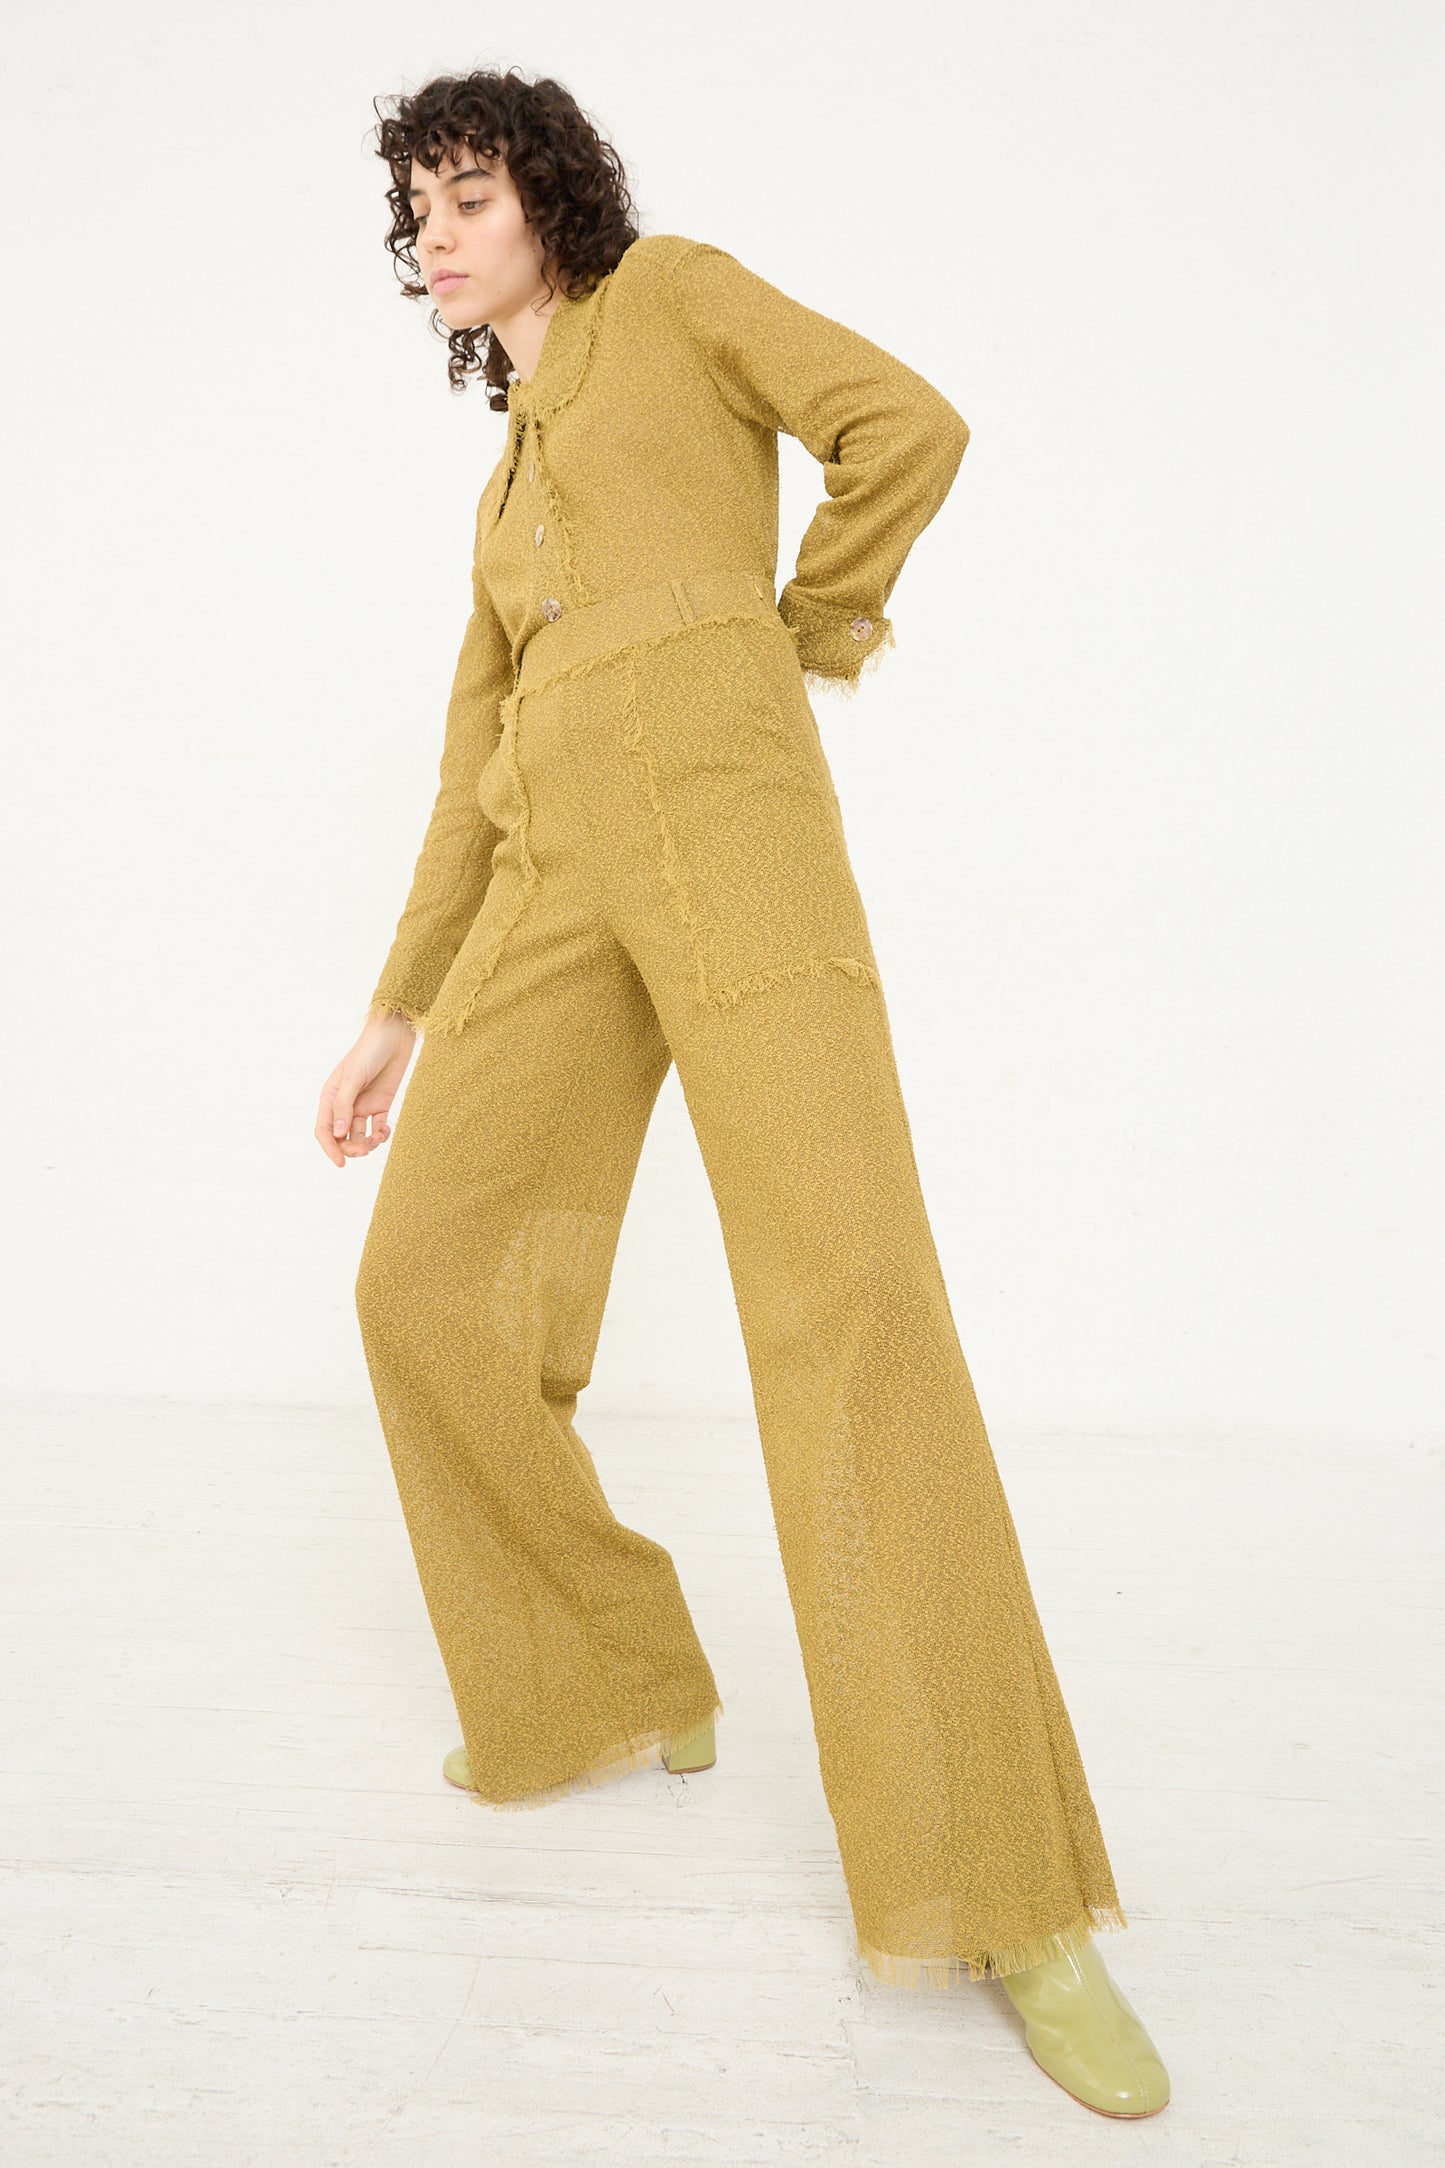 The model is wearing a Tweed Frayed Trouser in Cumin with oversized patch pockets from Veronique Leroy.